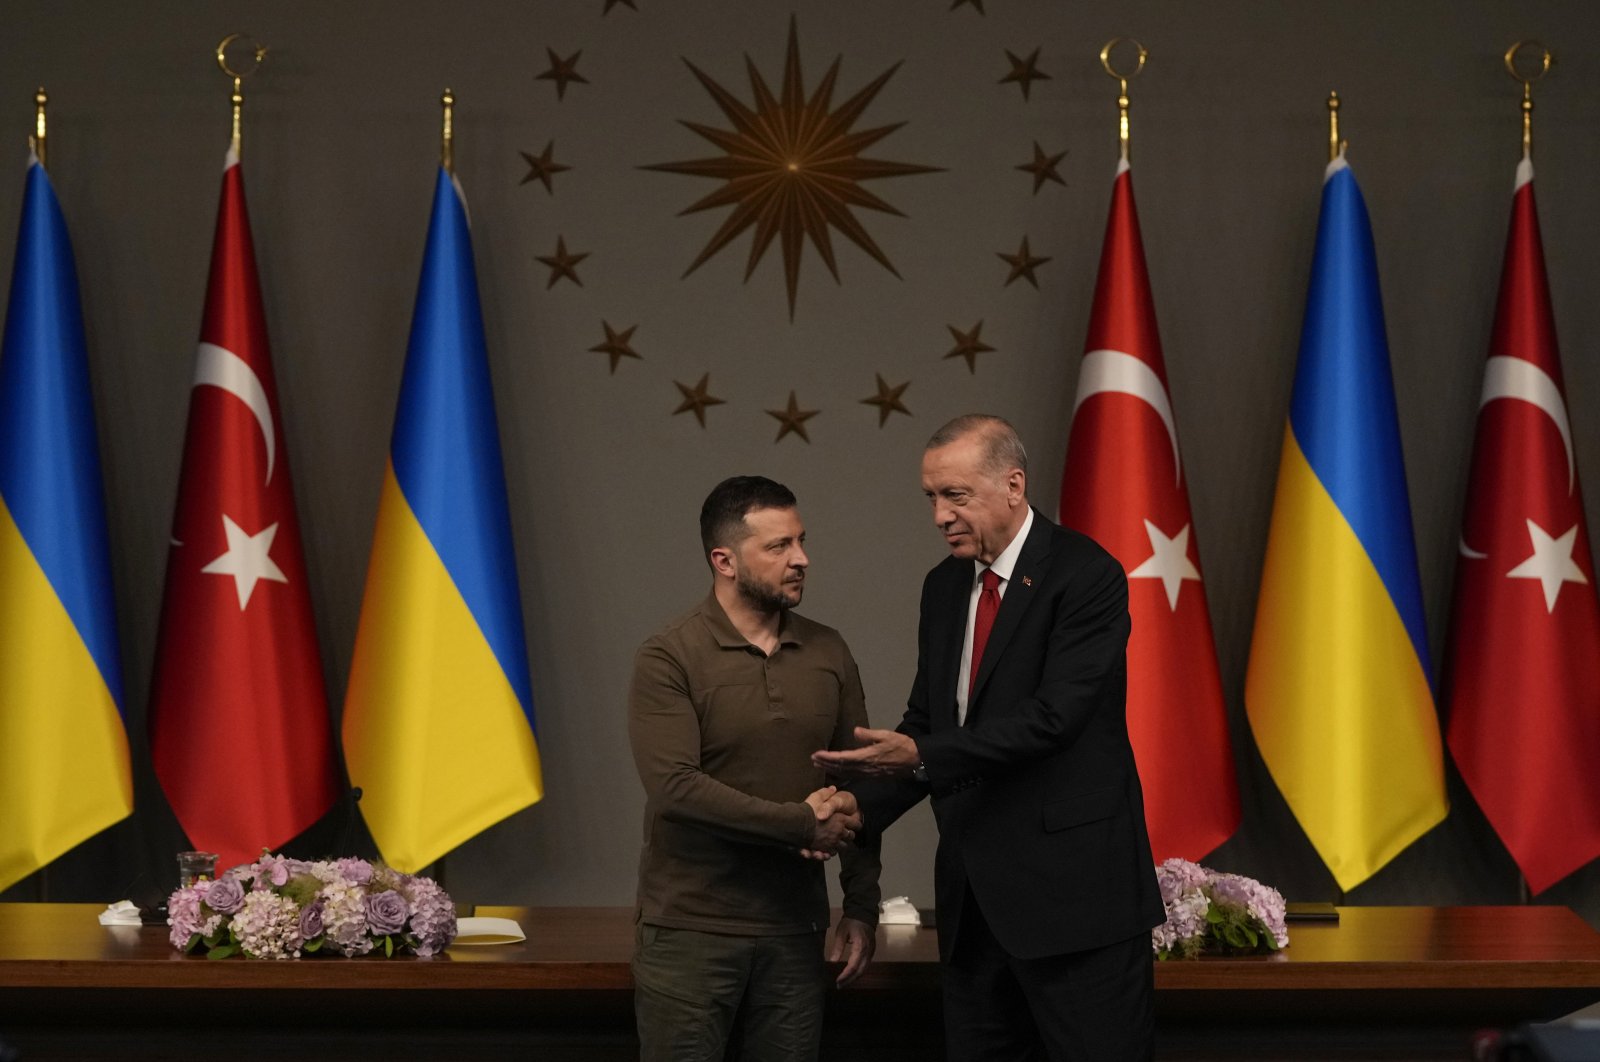 President Recep Tayyip Erdoğan shakes hands with Ukrainian President Volodymyr Zelenskyy at the end of a joint news conference following their meeting in Istanbul, Türkiye, July 8, 2023. (AP Photo)